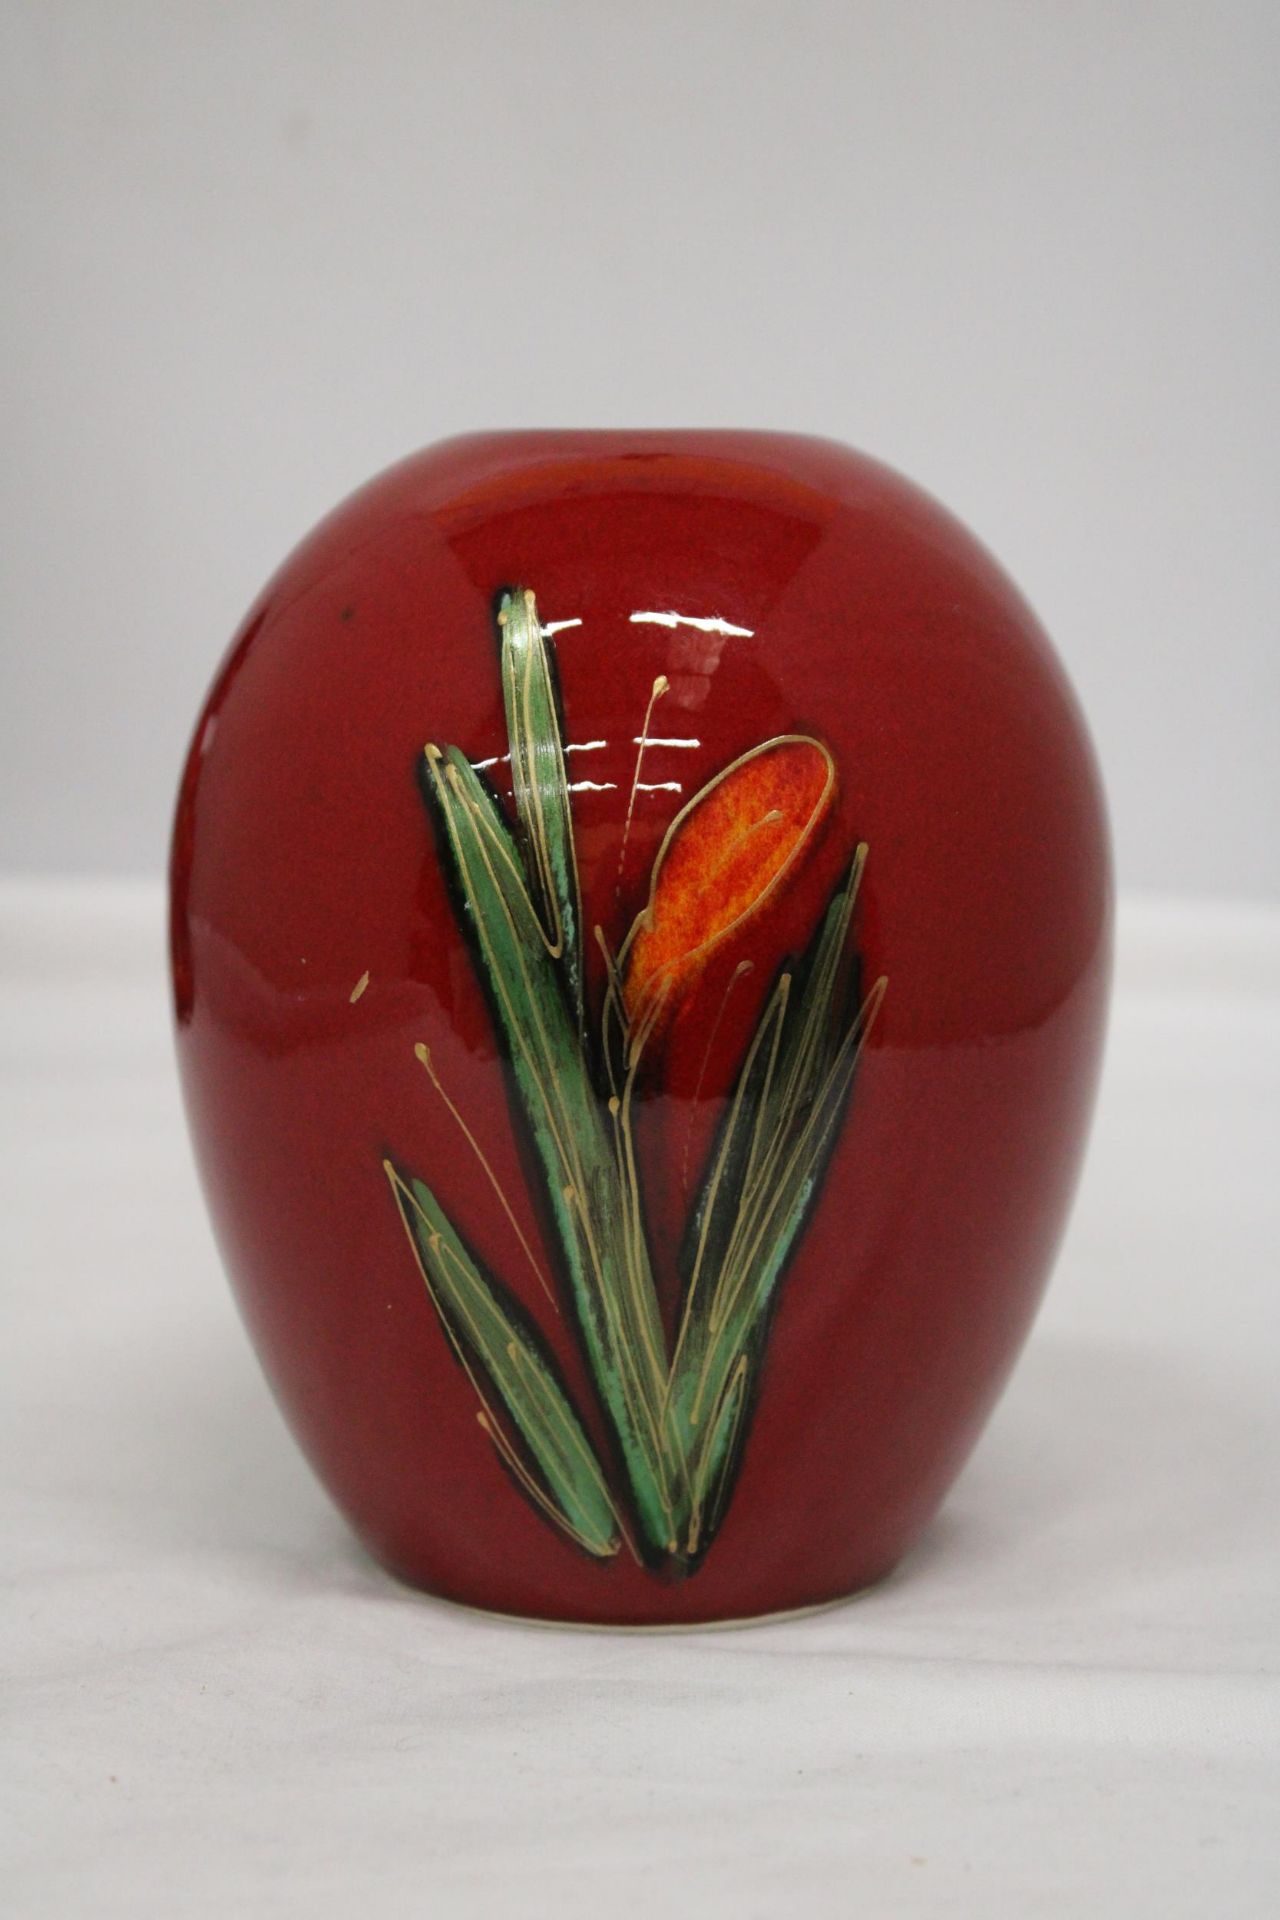 AN ANITA HARRIS DAFFODIL VASE (SIGNED IN GOLD) - Image 4 of 6